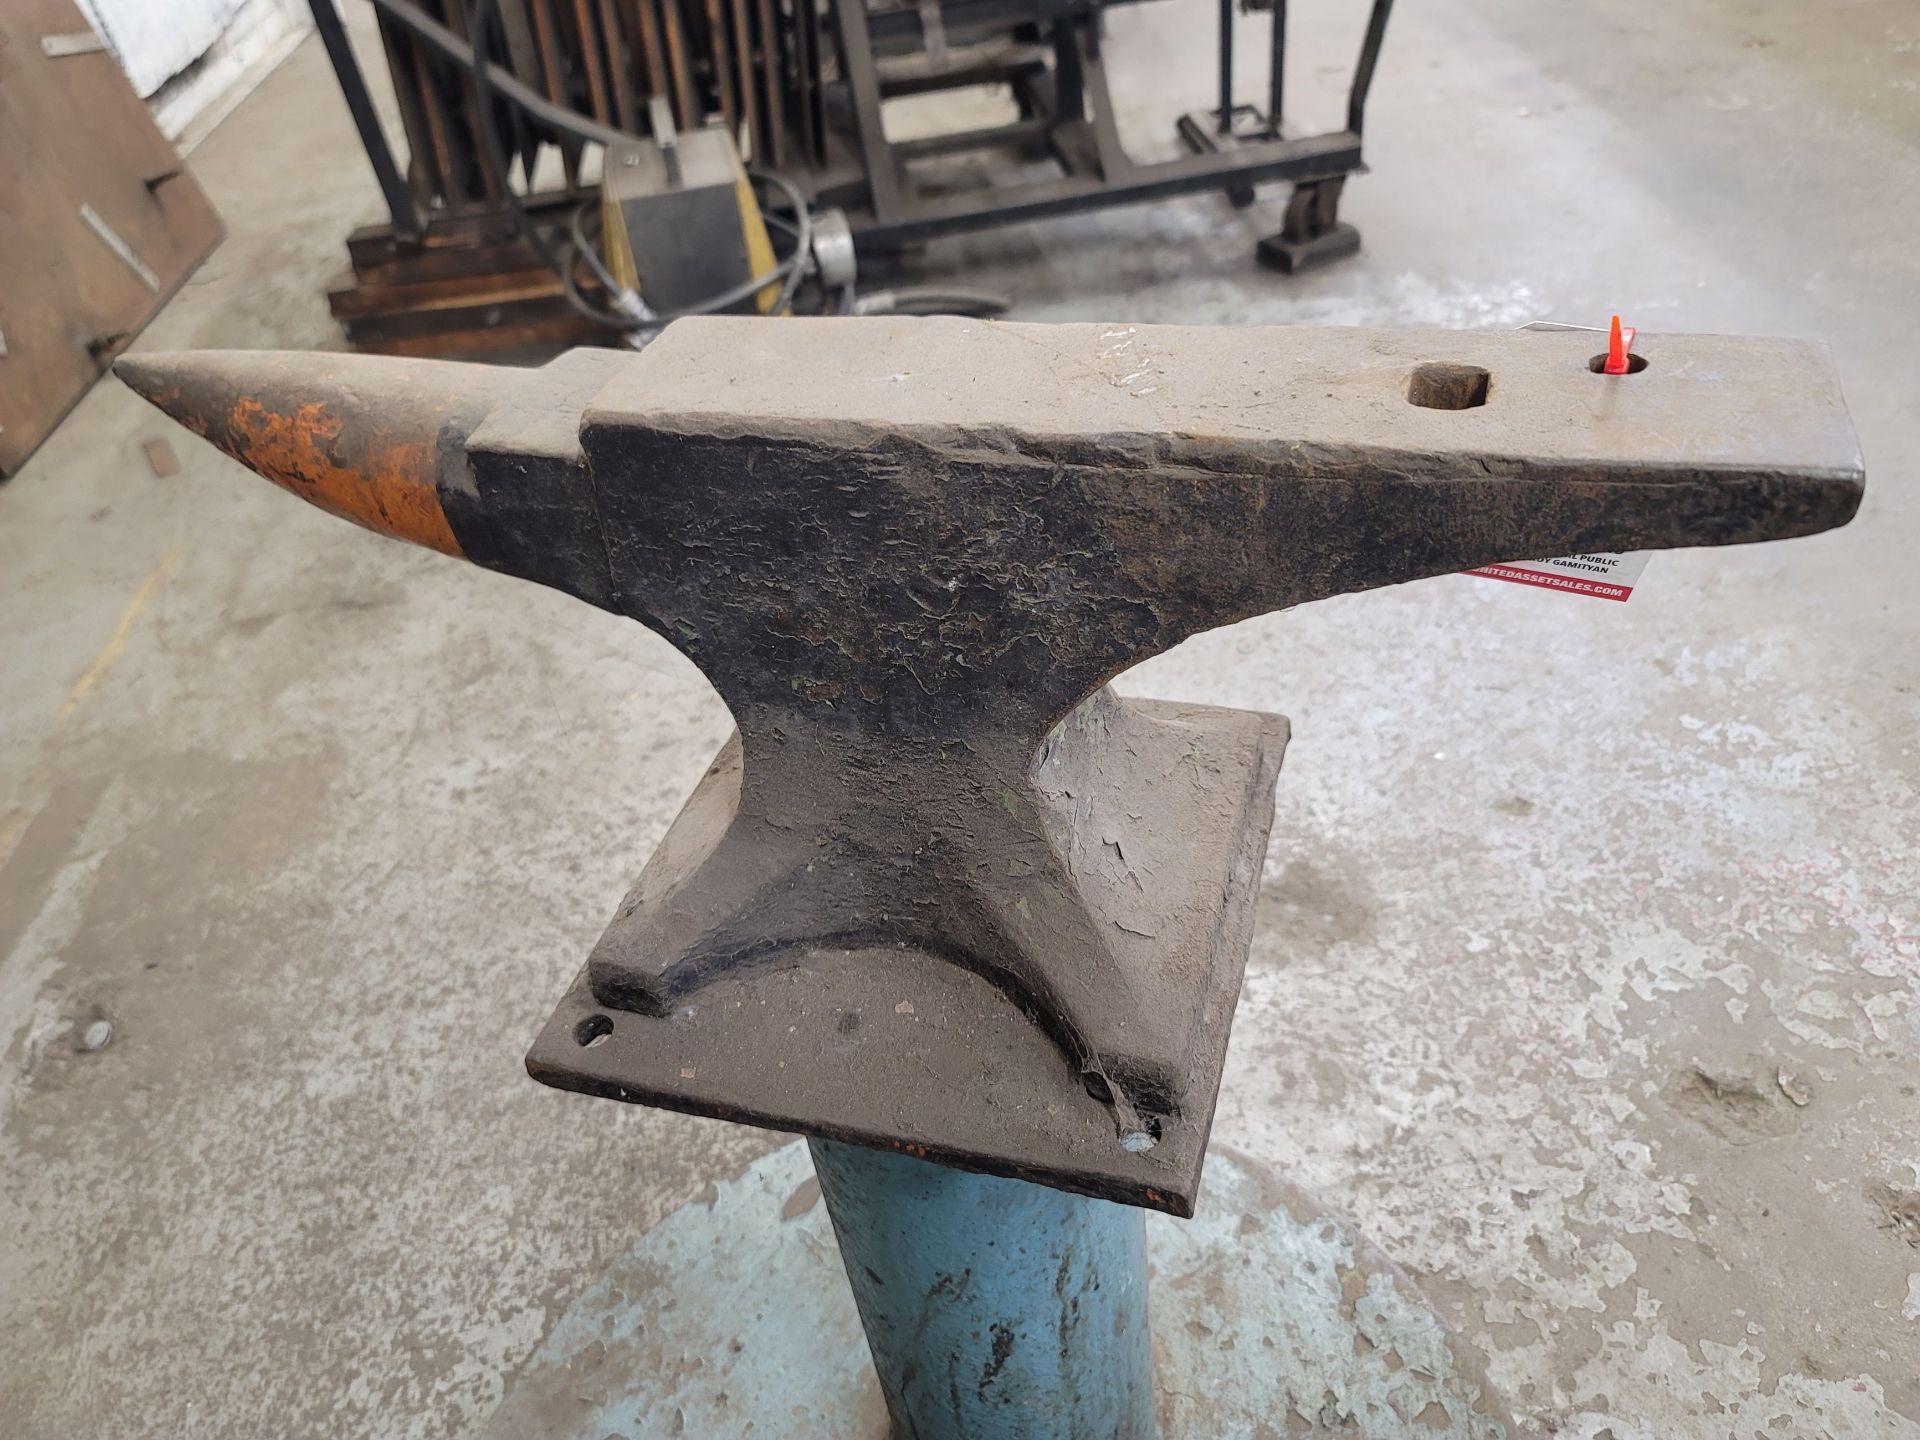 ANVIL, 25" X 3-1/2" X 9-1/2" HT, UNKNOWN BRAND - Image 4 of 5